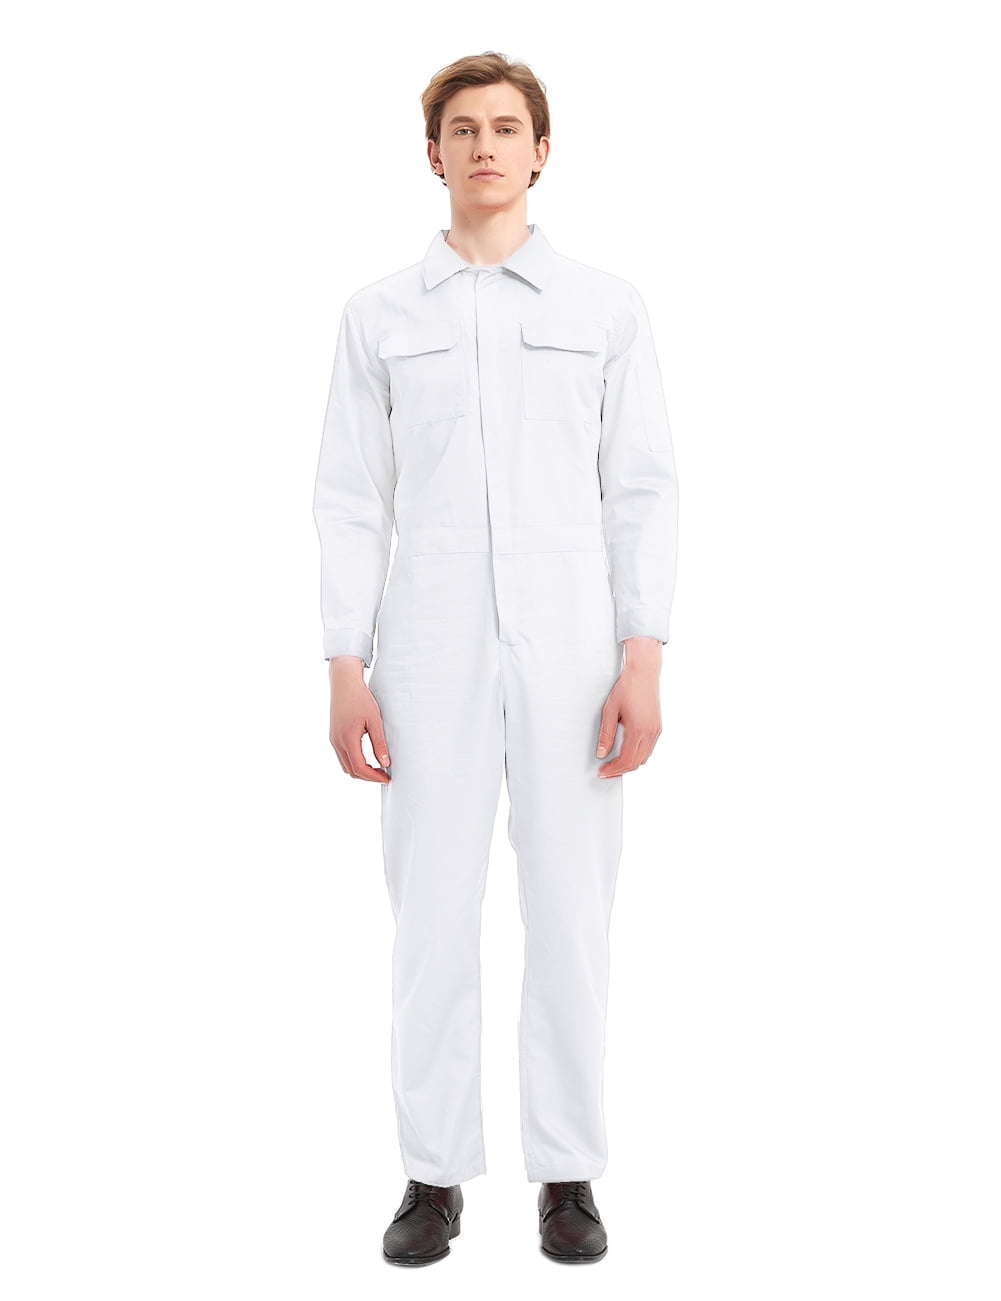  Men's Work Utility & Safety Overalls & Coveralls - 2XBT / Men's  Work Utility & S: Clothing, Shoes & Jewelry